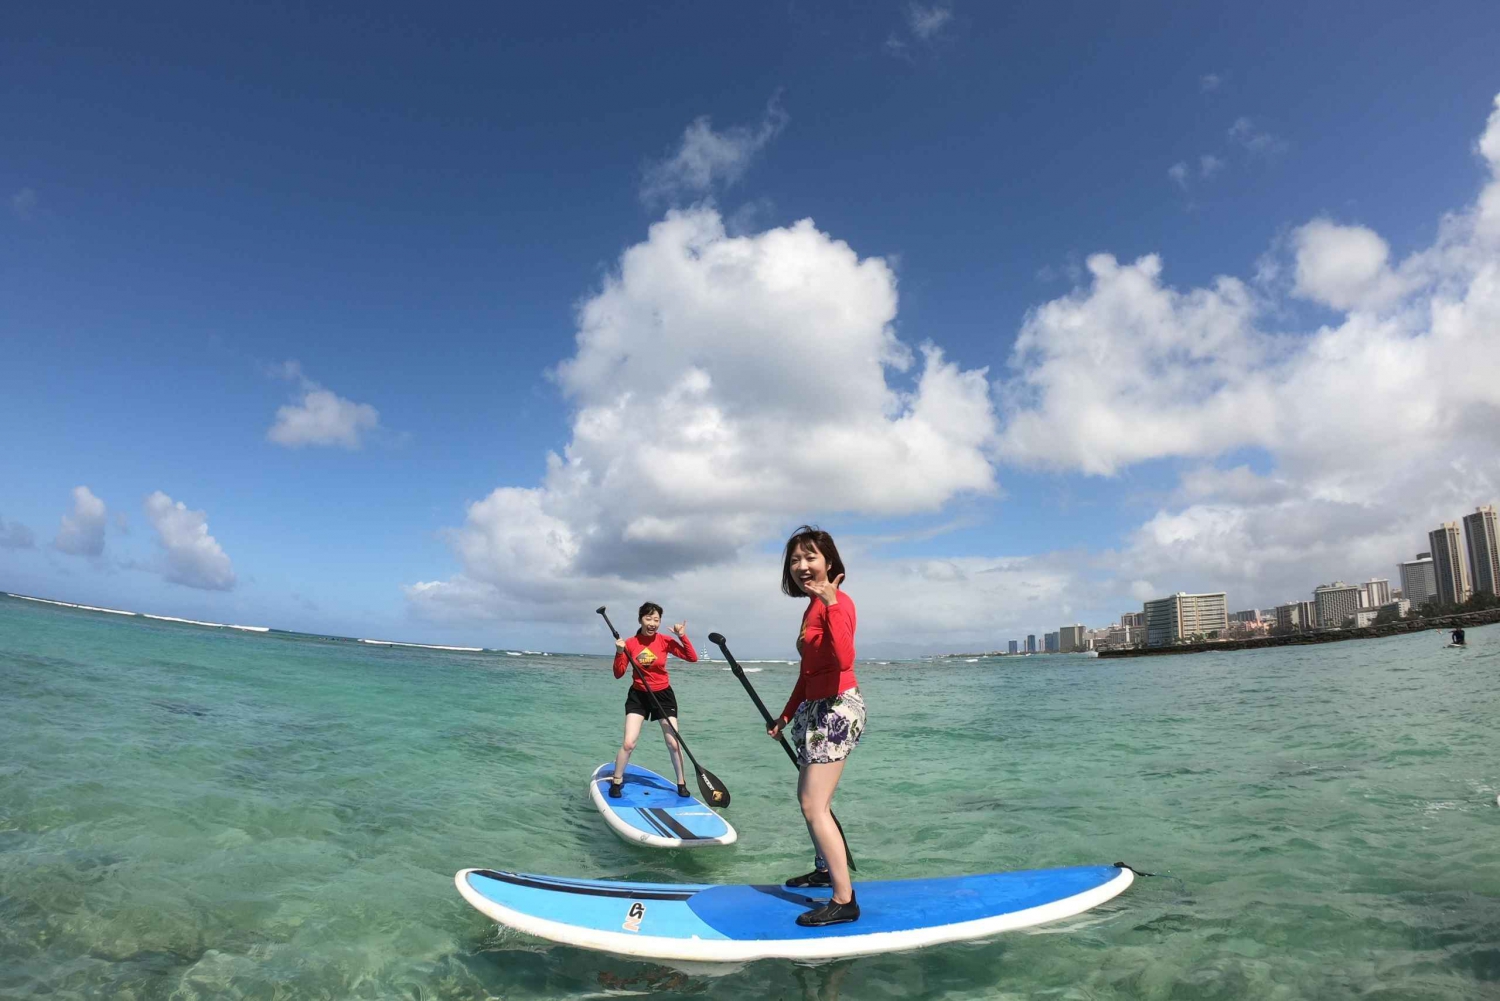 Waikiki Semi-private SUP lesson: 2 students to 1 instructor